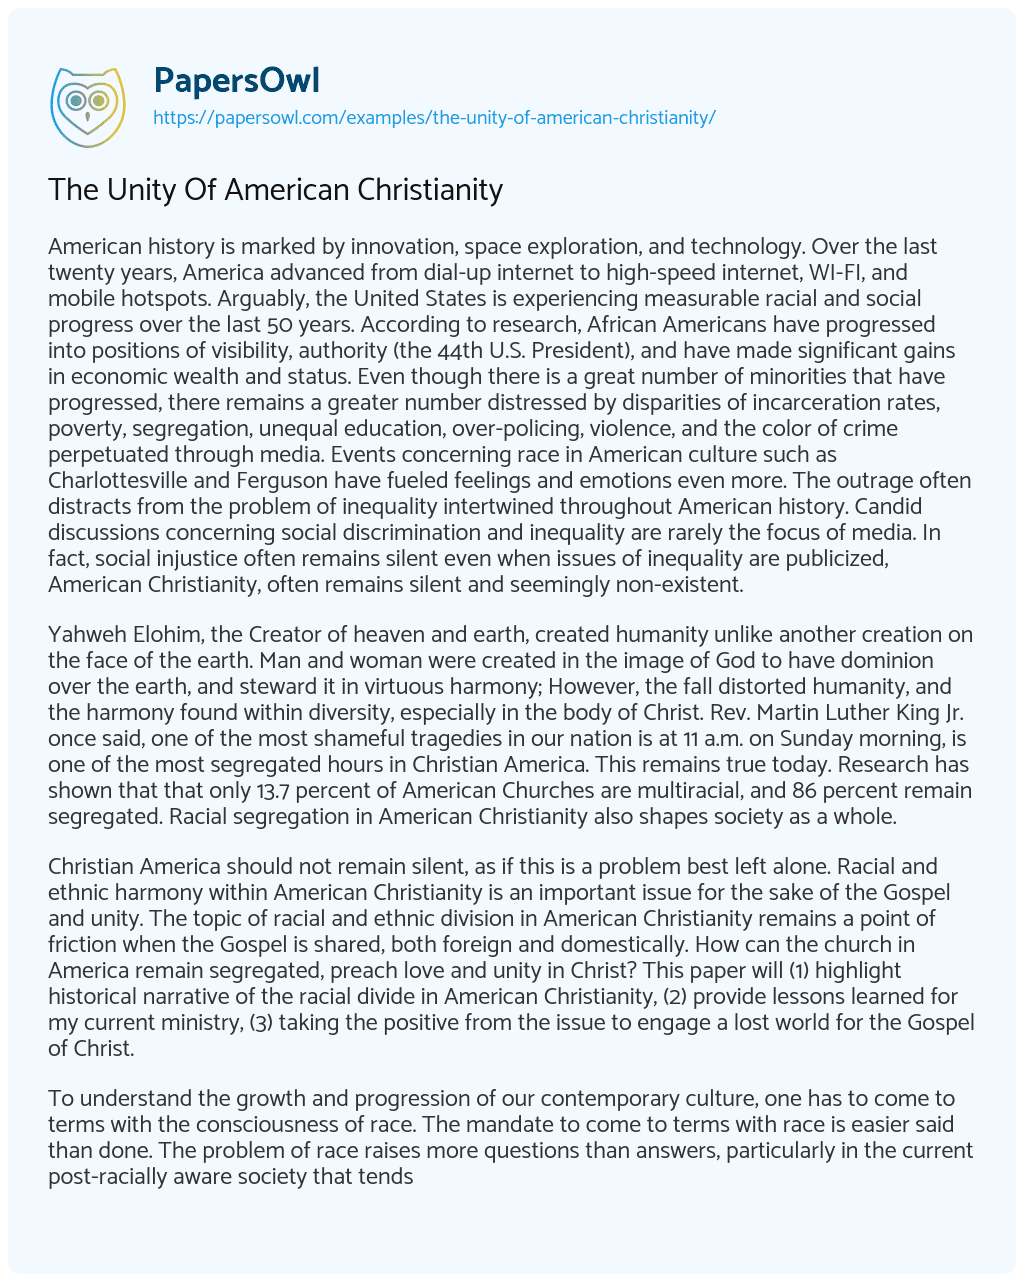 Essay on The Unity of American Christianity